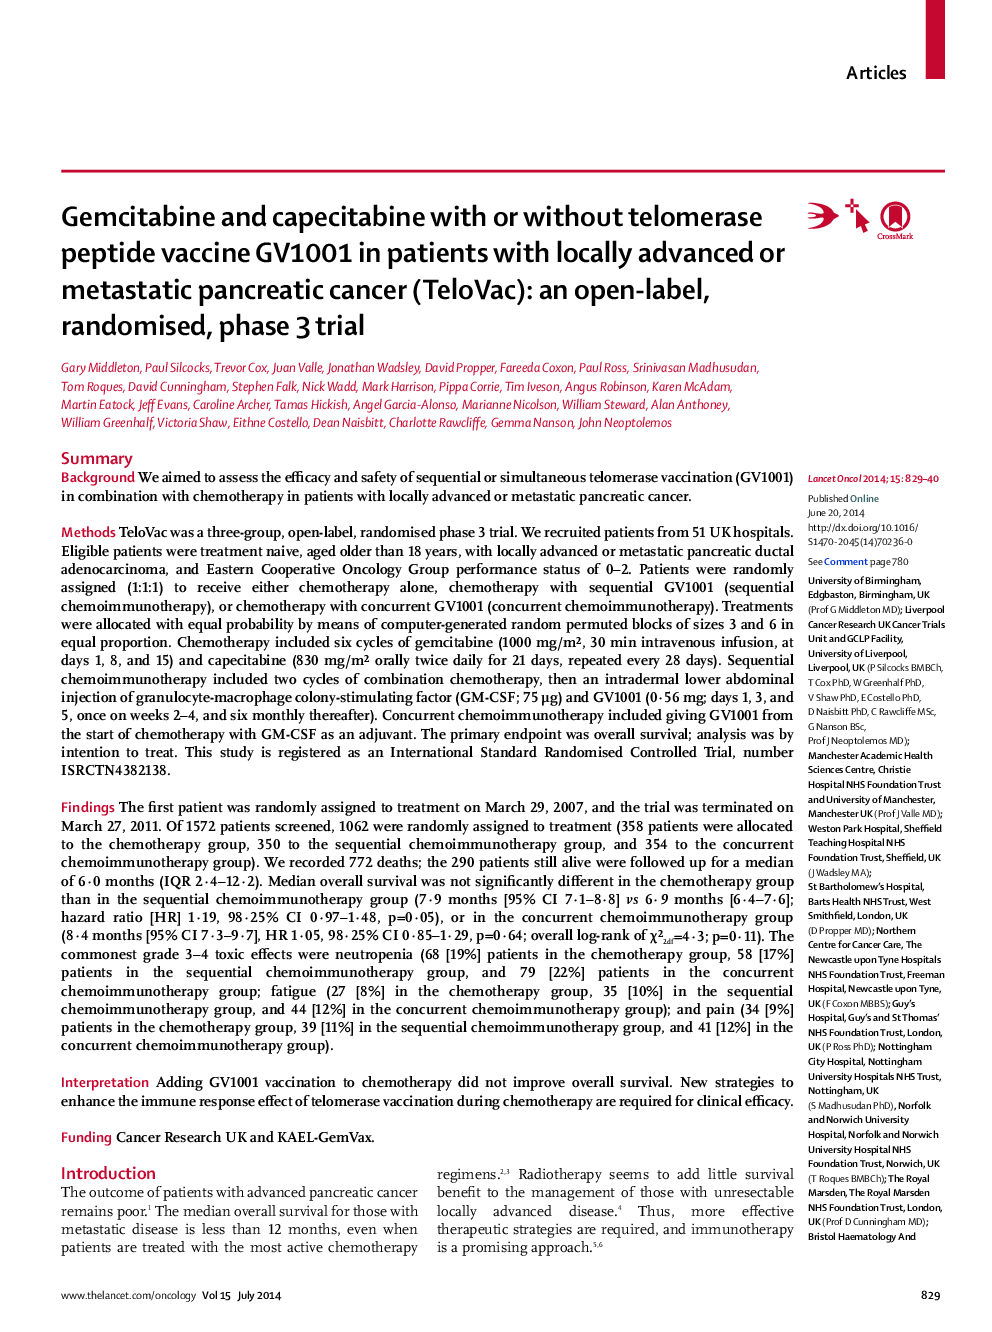 Gemcitabine and capecitabine with or without telomerase peptide vaccine GV1001 in patients with locally advanced or metastatic pancreatic cancer (TeloVac): an open-label, randomised, phase 3 trial